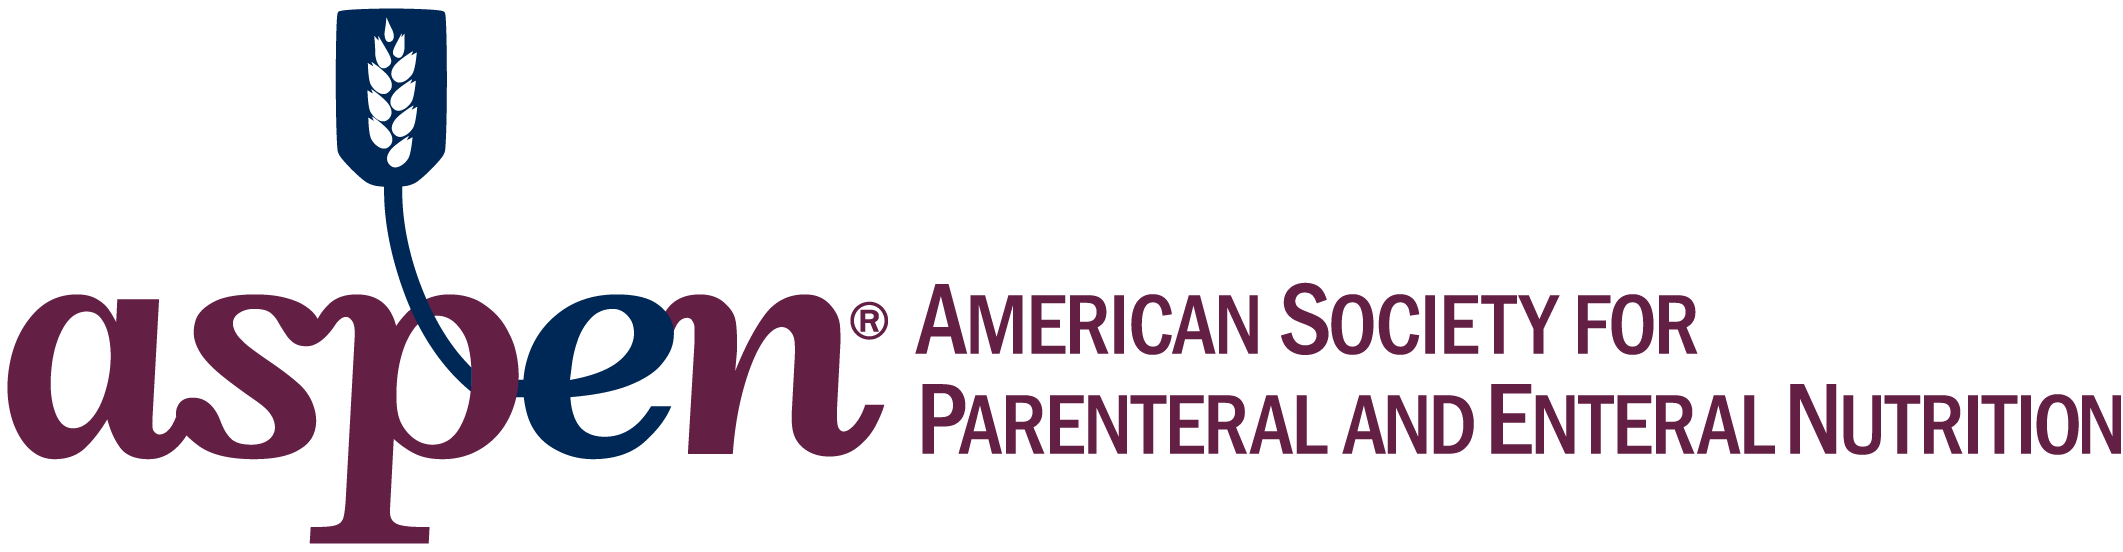 American Society for Parenteral and Enteral Nutrition